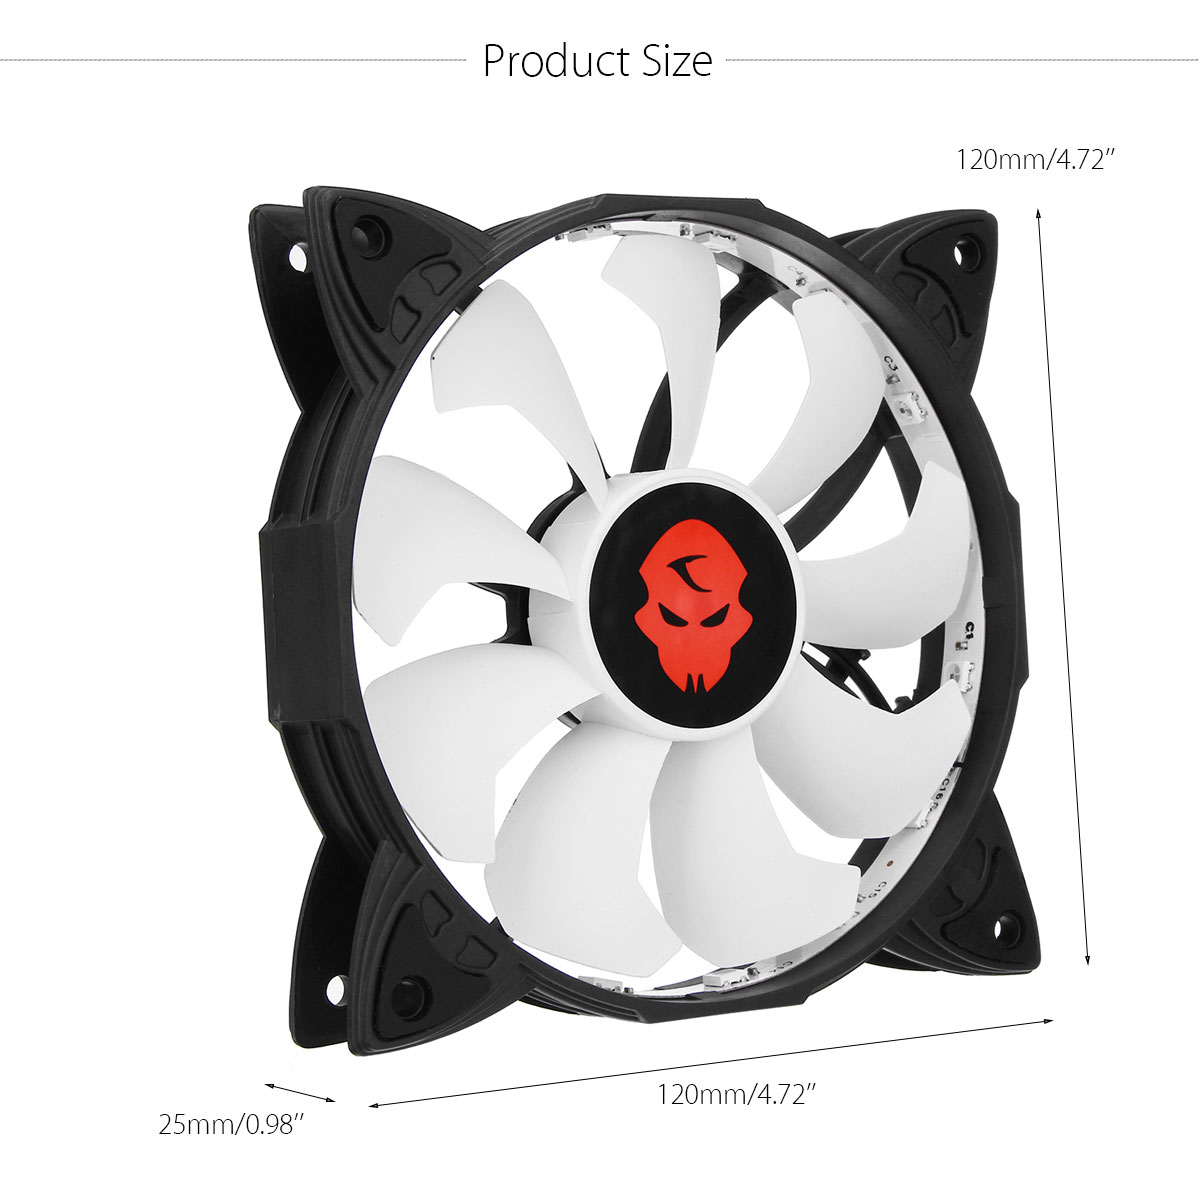 Coolmoon-30000Hrs-3PCS-120mm-RGB-Adjustable-LED-Cooling-Fan-with-Controller-Remote-For-PC-Cooling-1198616